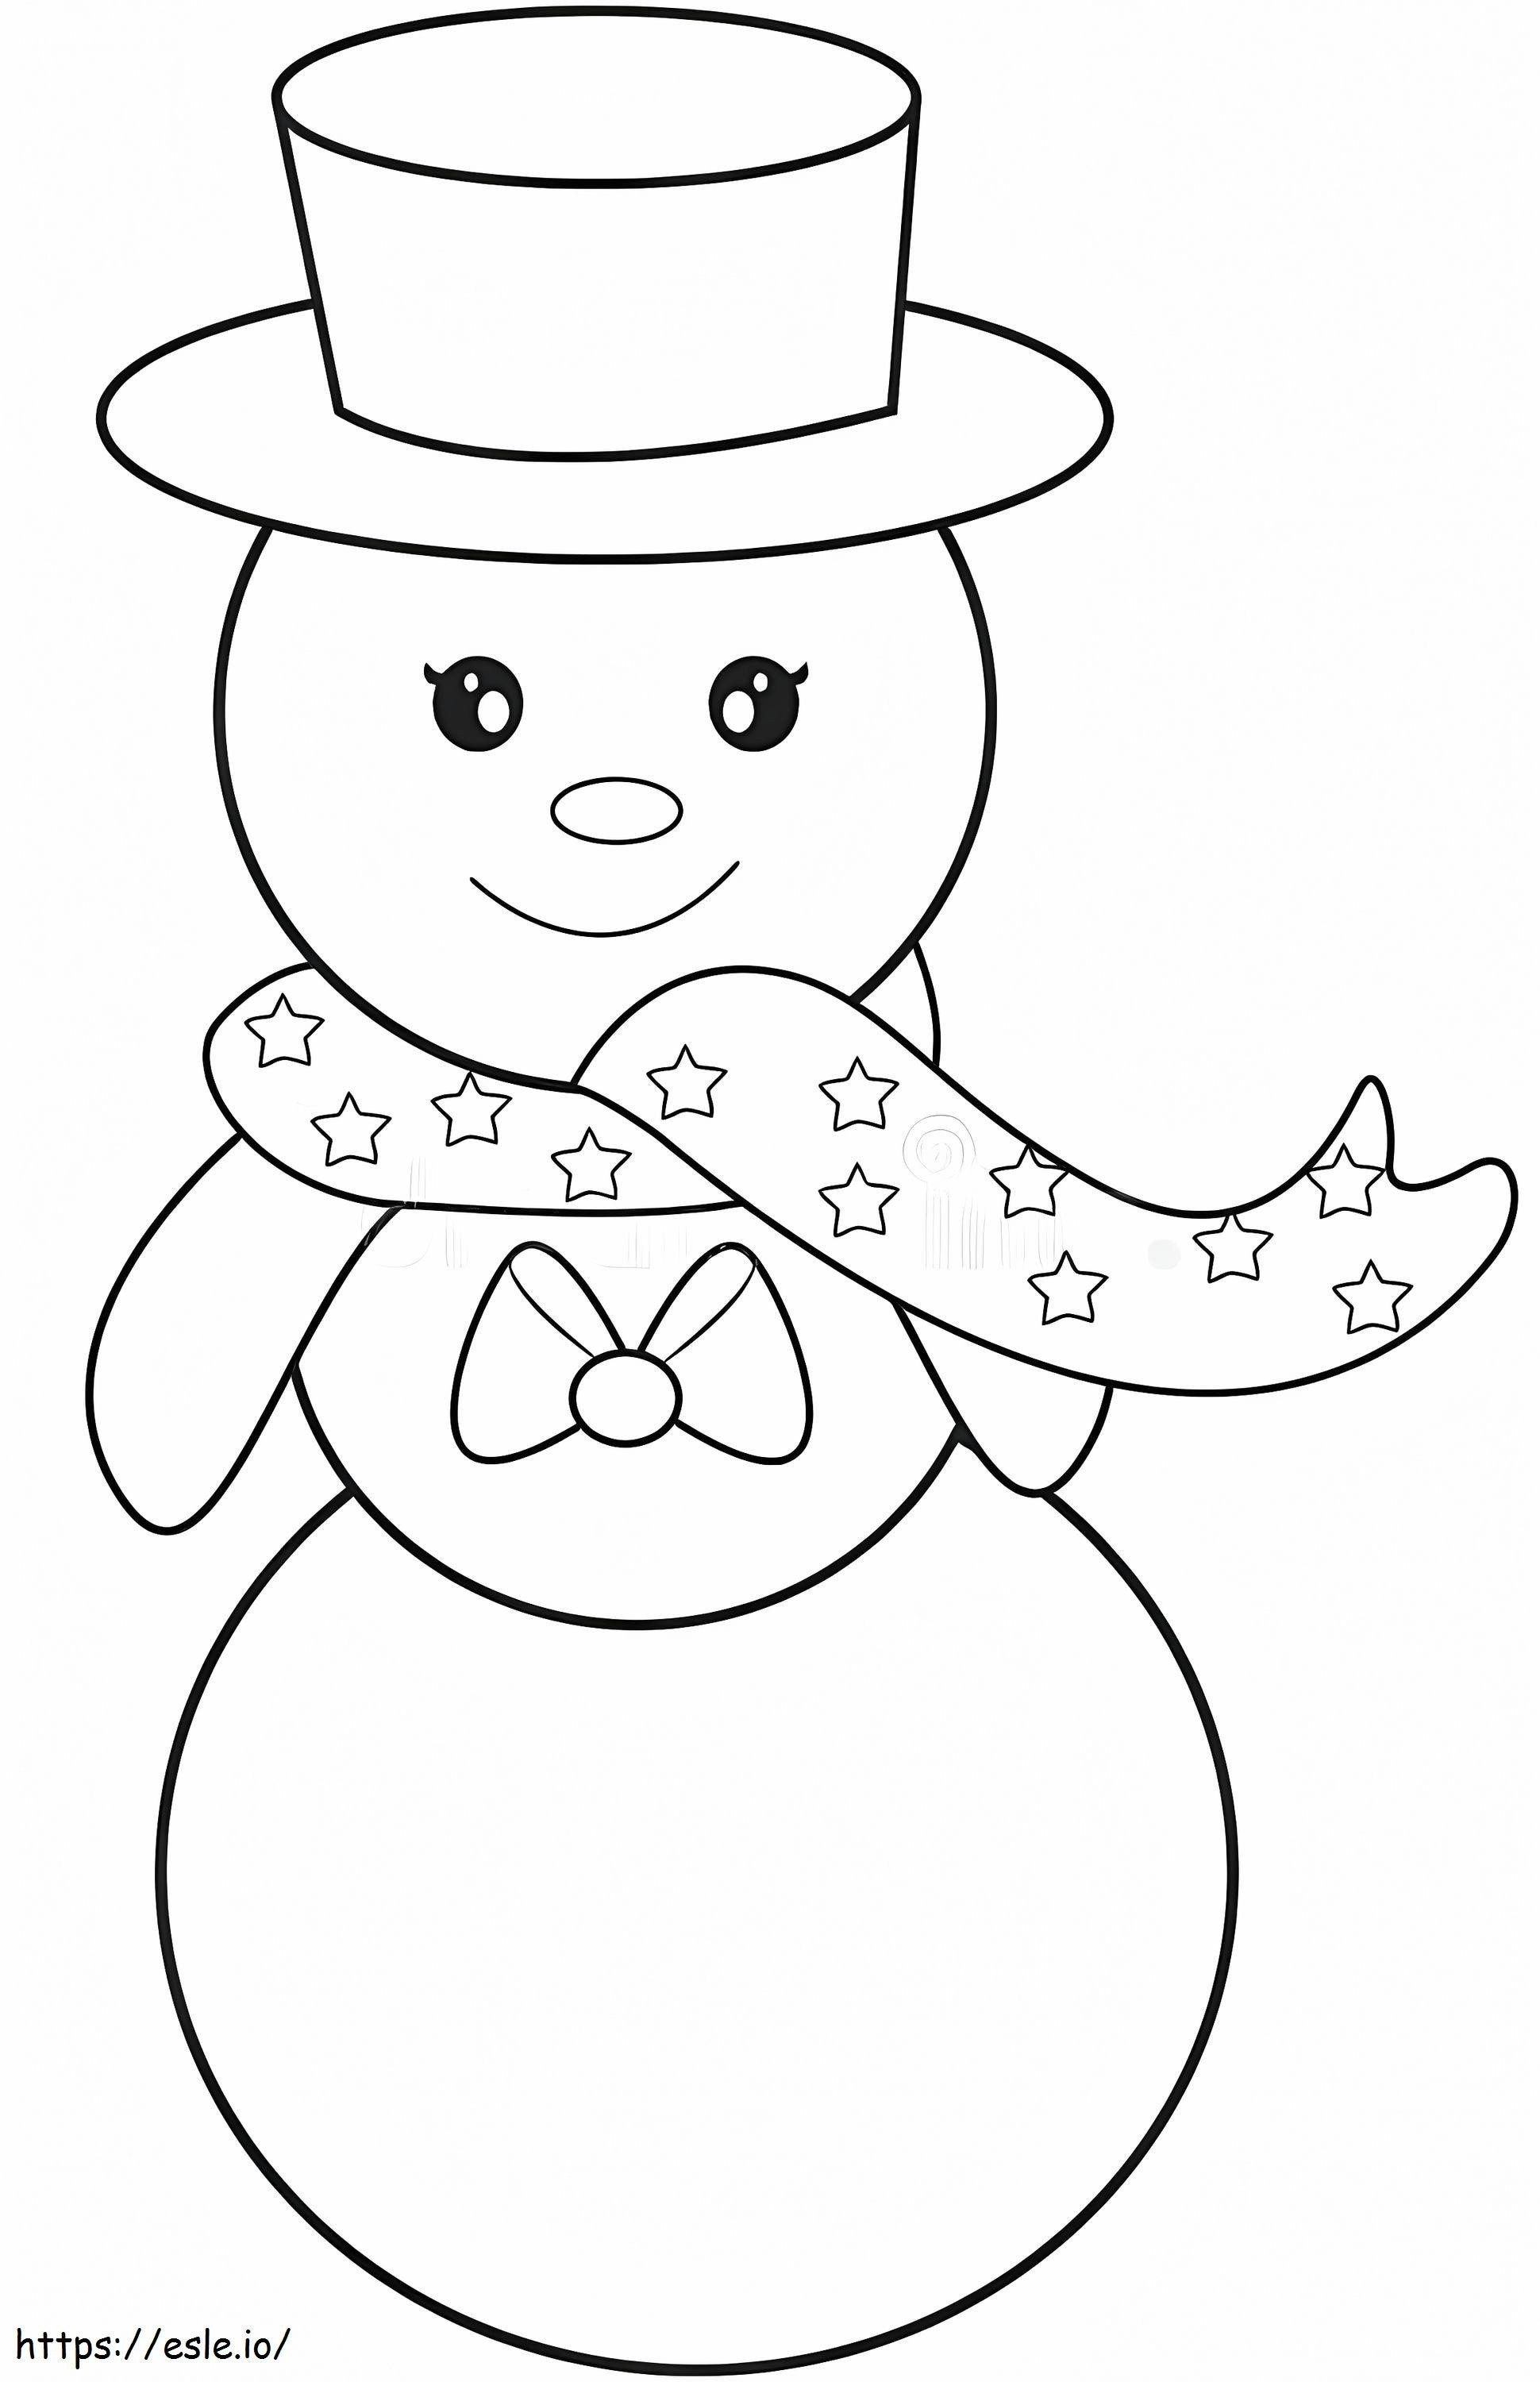 Normal Snowman coloring page